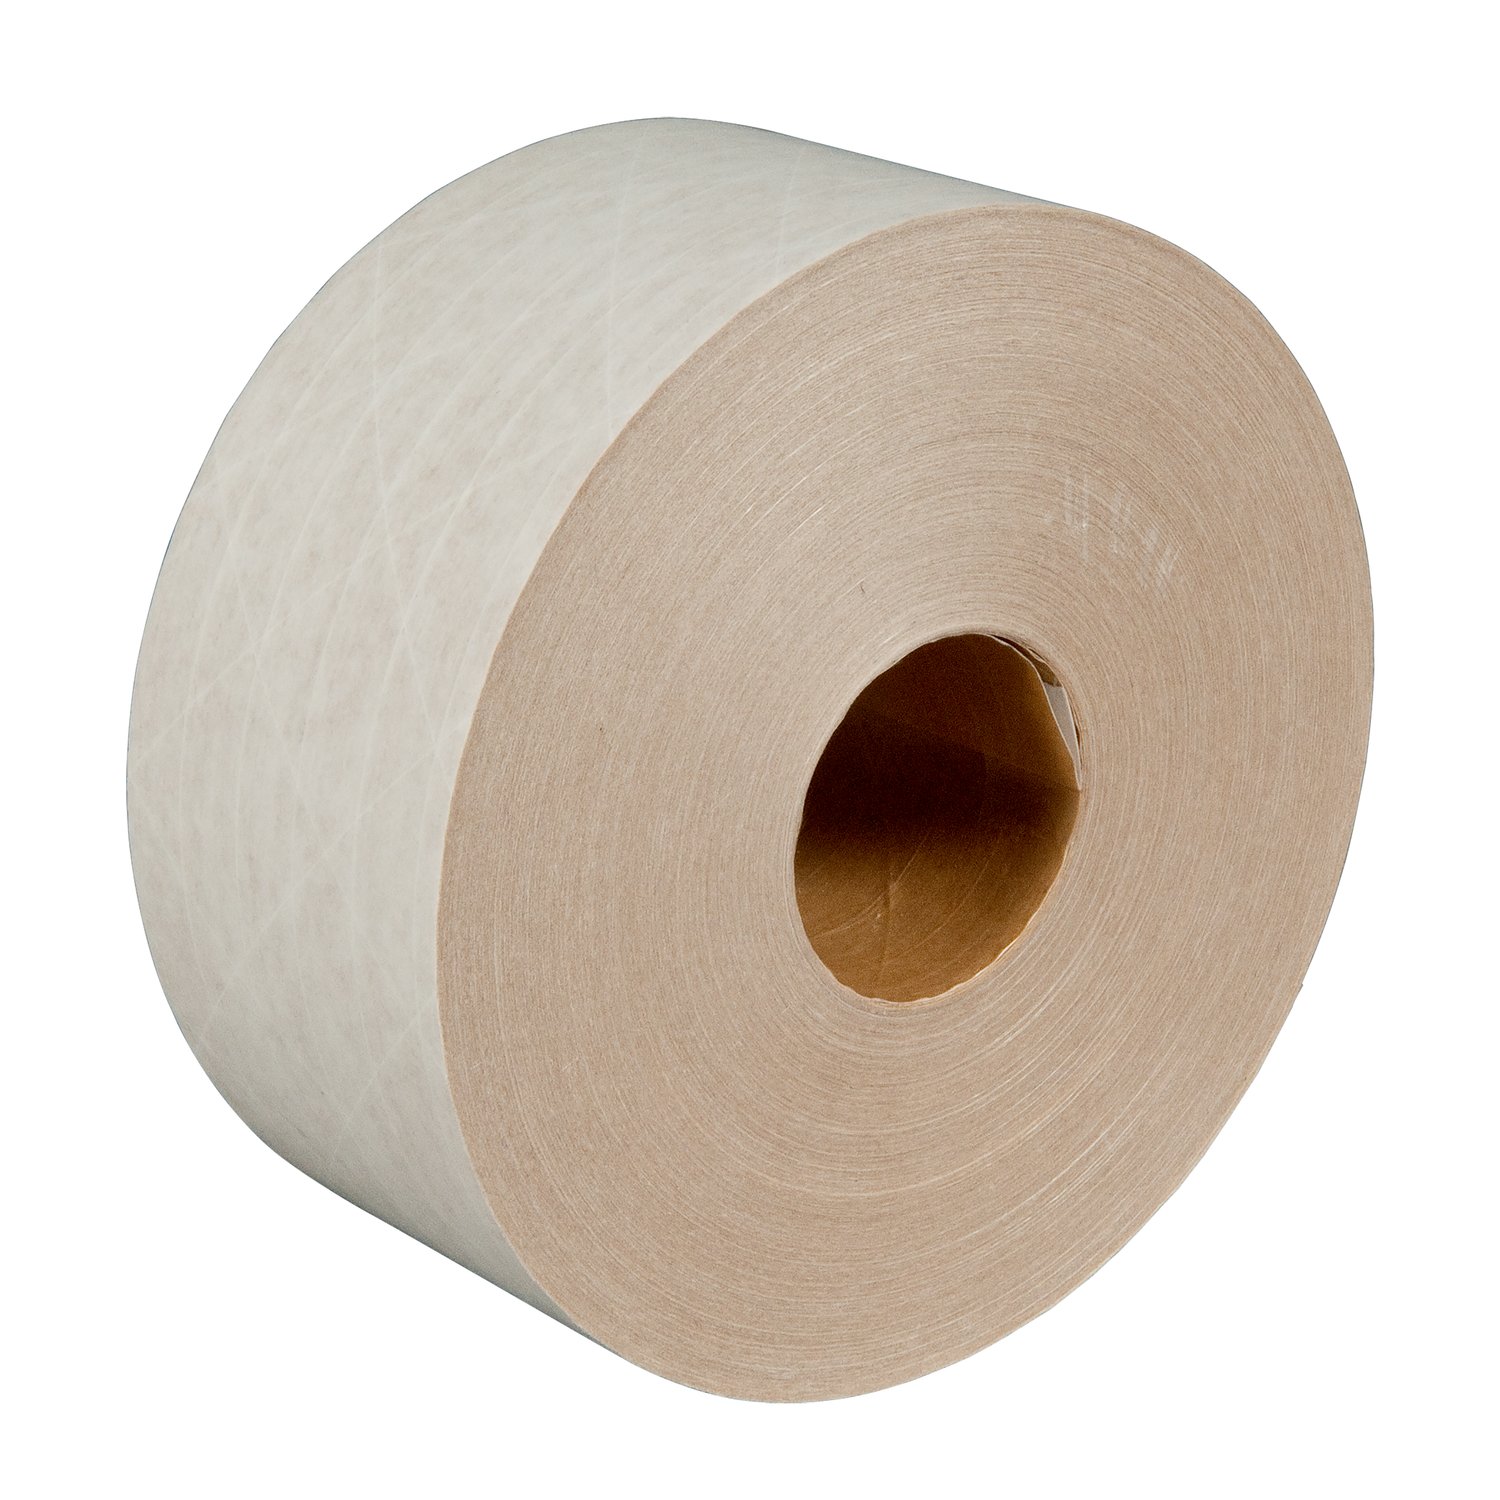 7100171407 - 3M Water Activated Paper Tape 6145, White, Light Duty Reinforced, 12
inch x 4500 ft, Pallet Pack